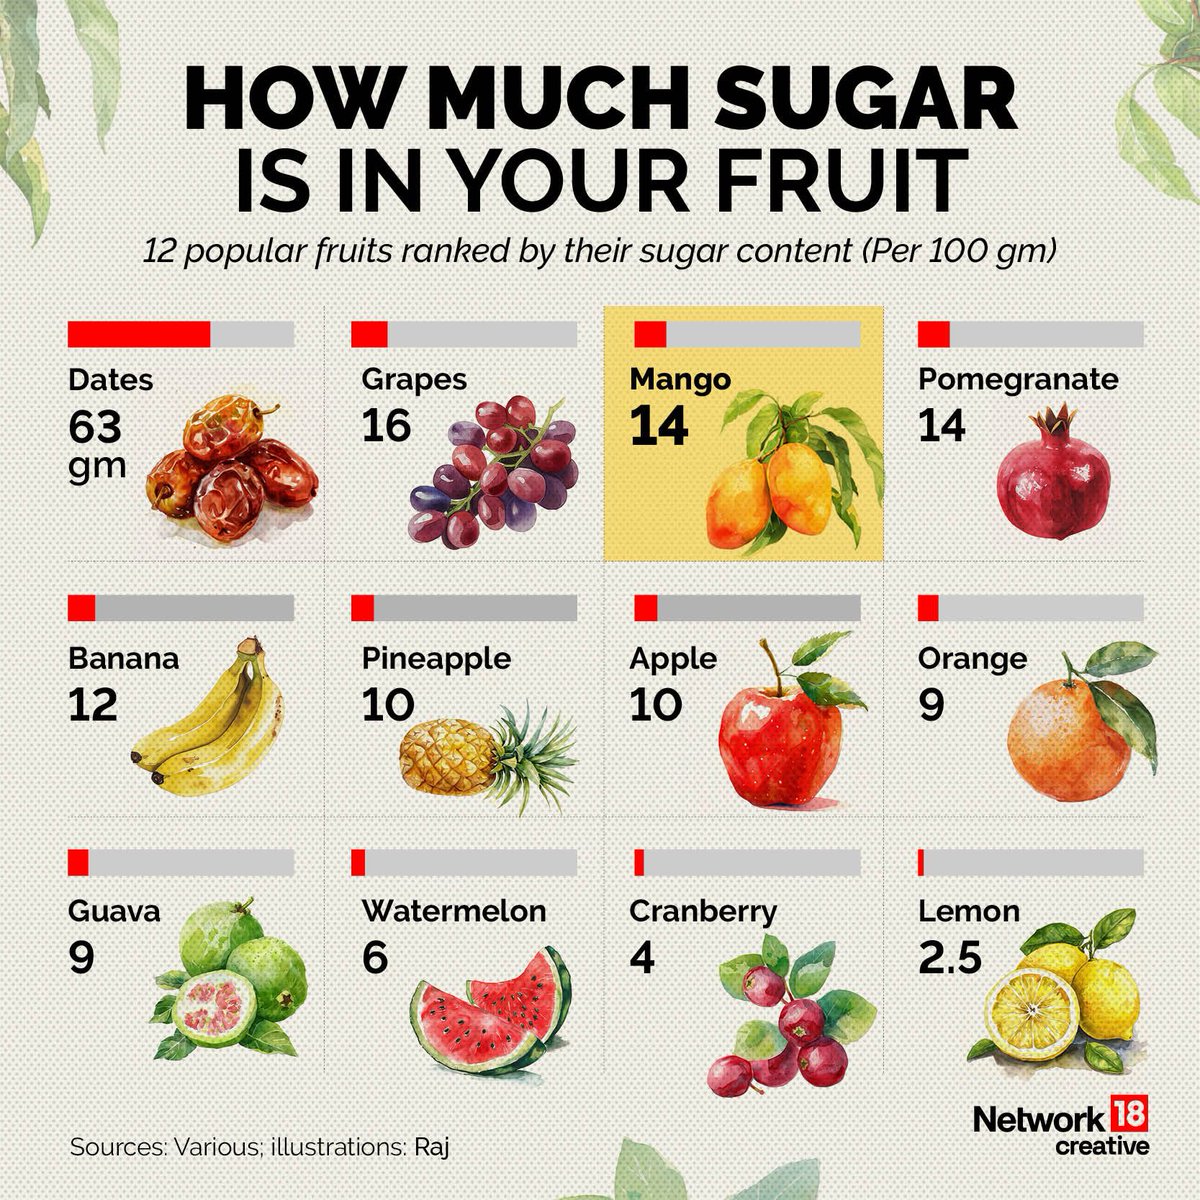 As the war of words continues between #ED and Delhi CM Arvind Kejriwal over the consumption of 'Mangoes' —  here's a comparison of sugar content in mangoes and some other popular fruits.

#Mango #MangoSeason #ArvindKejiwal 

Read: buff.ly/3xFZoZY